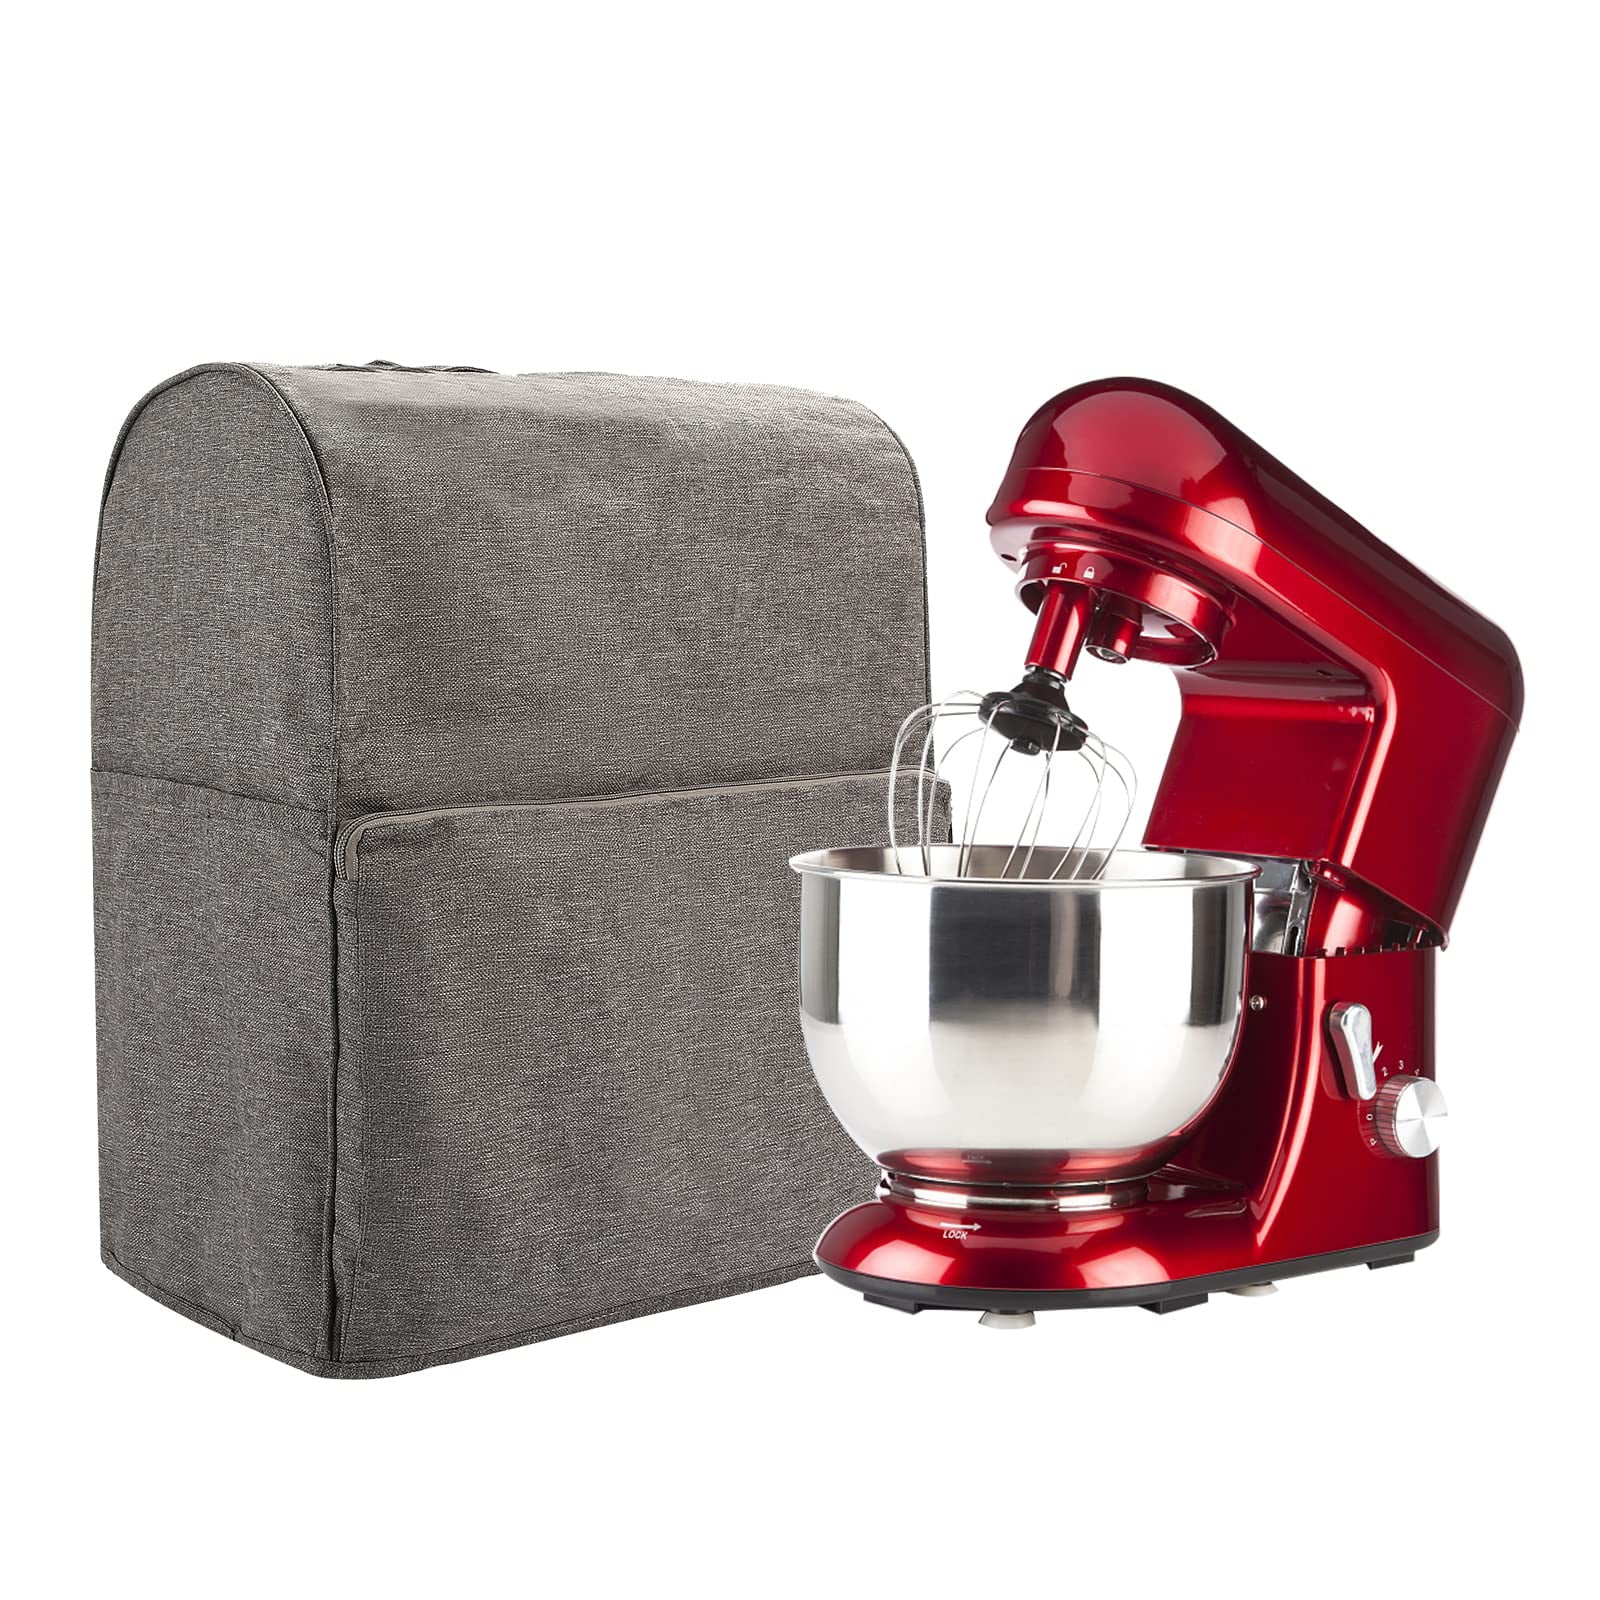 Home Stand Mixer Dust-proof Cover with Pockets Organizer Bag for